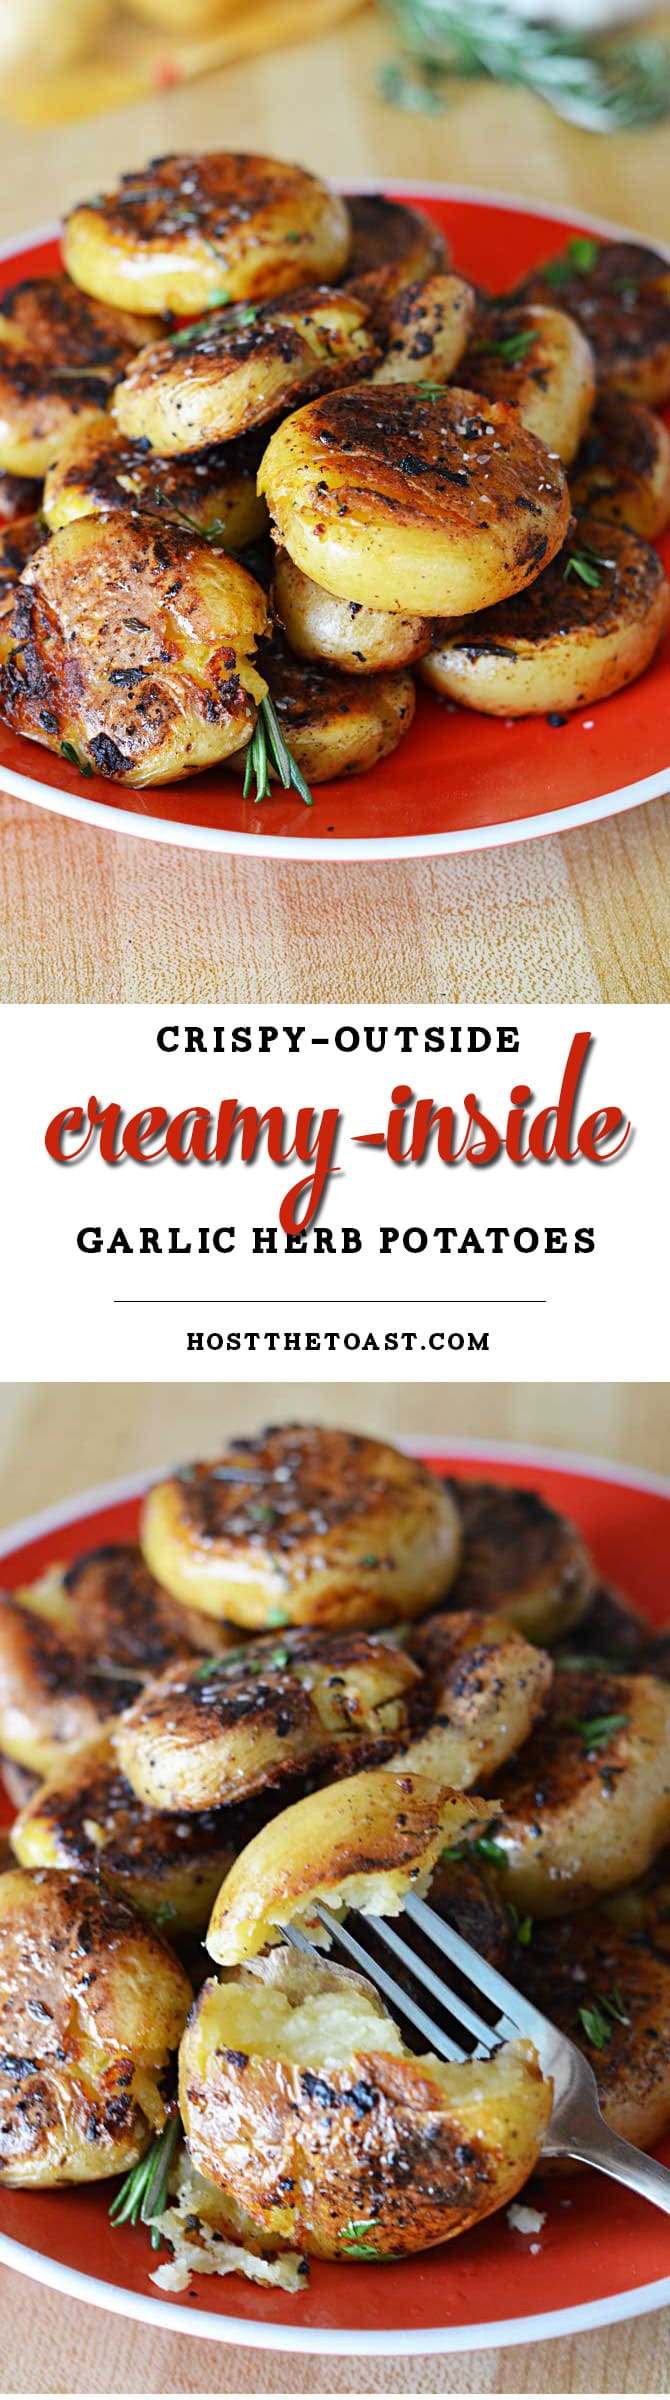 Crispy-Outside Creamy-Inside Garlic Herb Potatoes. Quite possibly the BEST POTATOES / SIDE DISH EVER. | hostthetoast.com